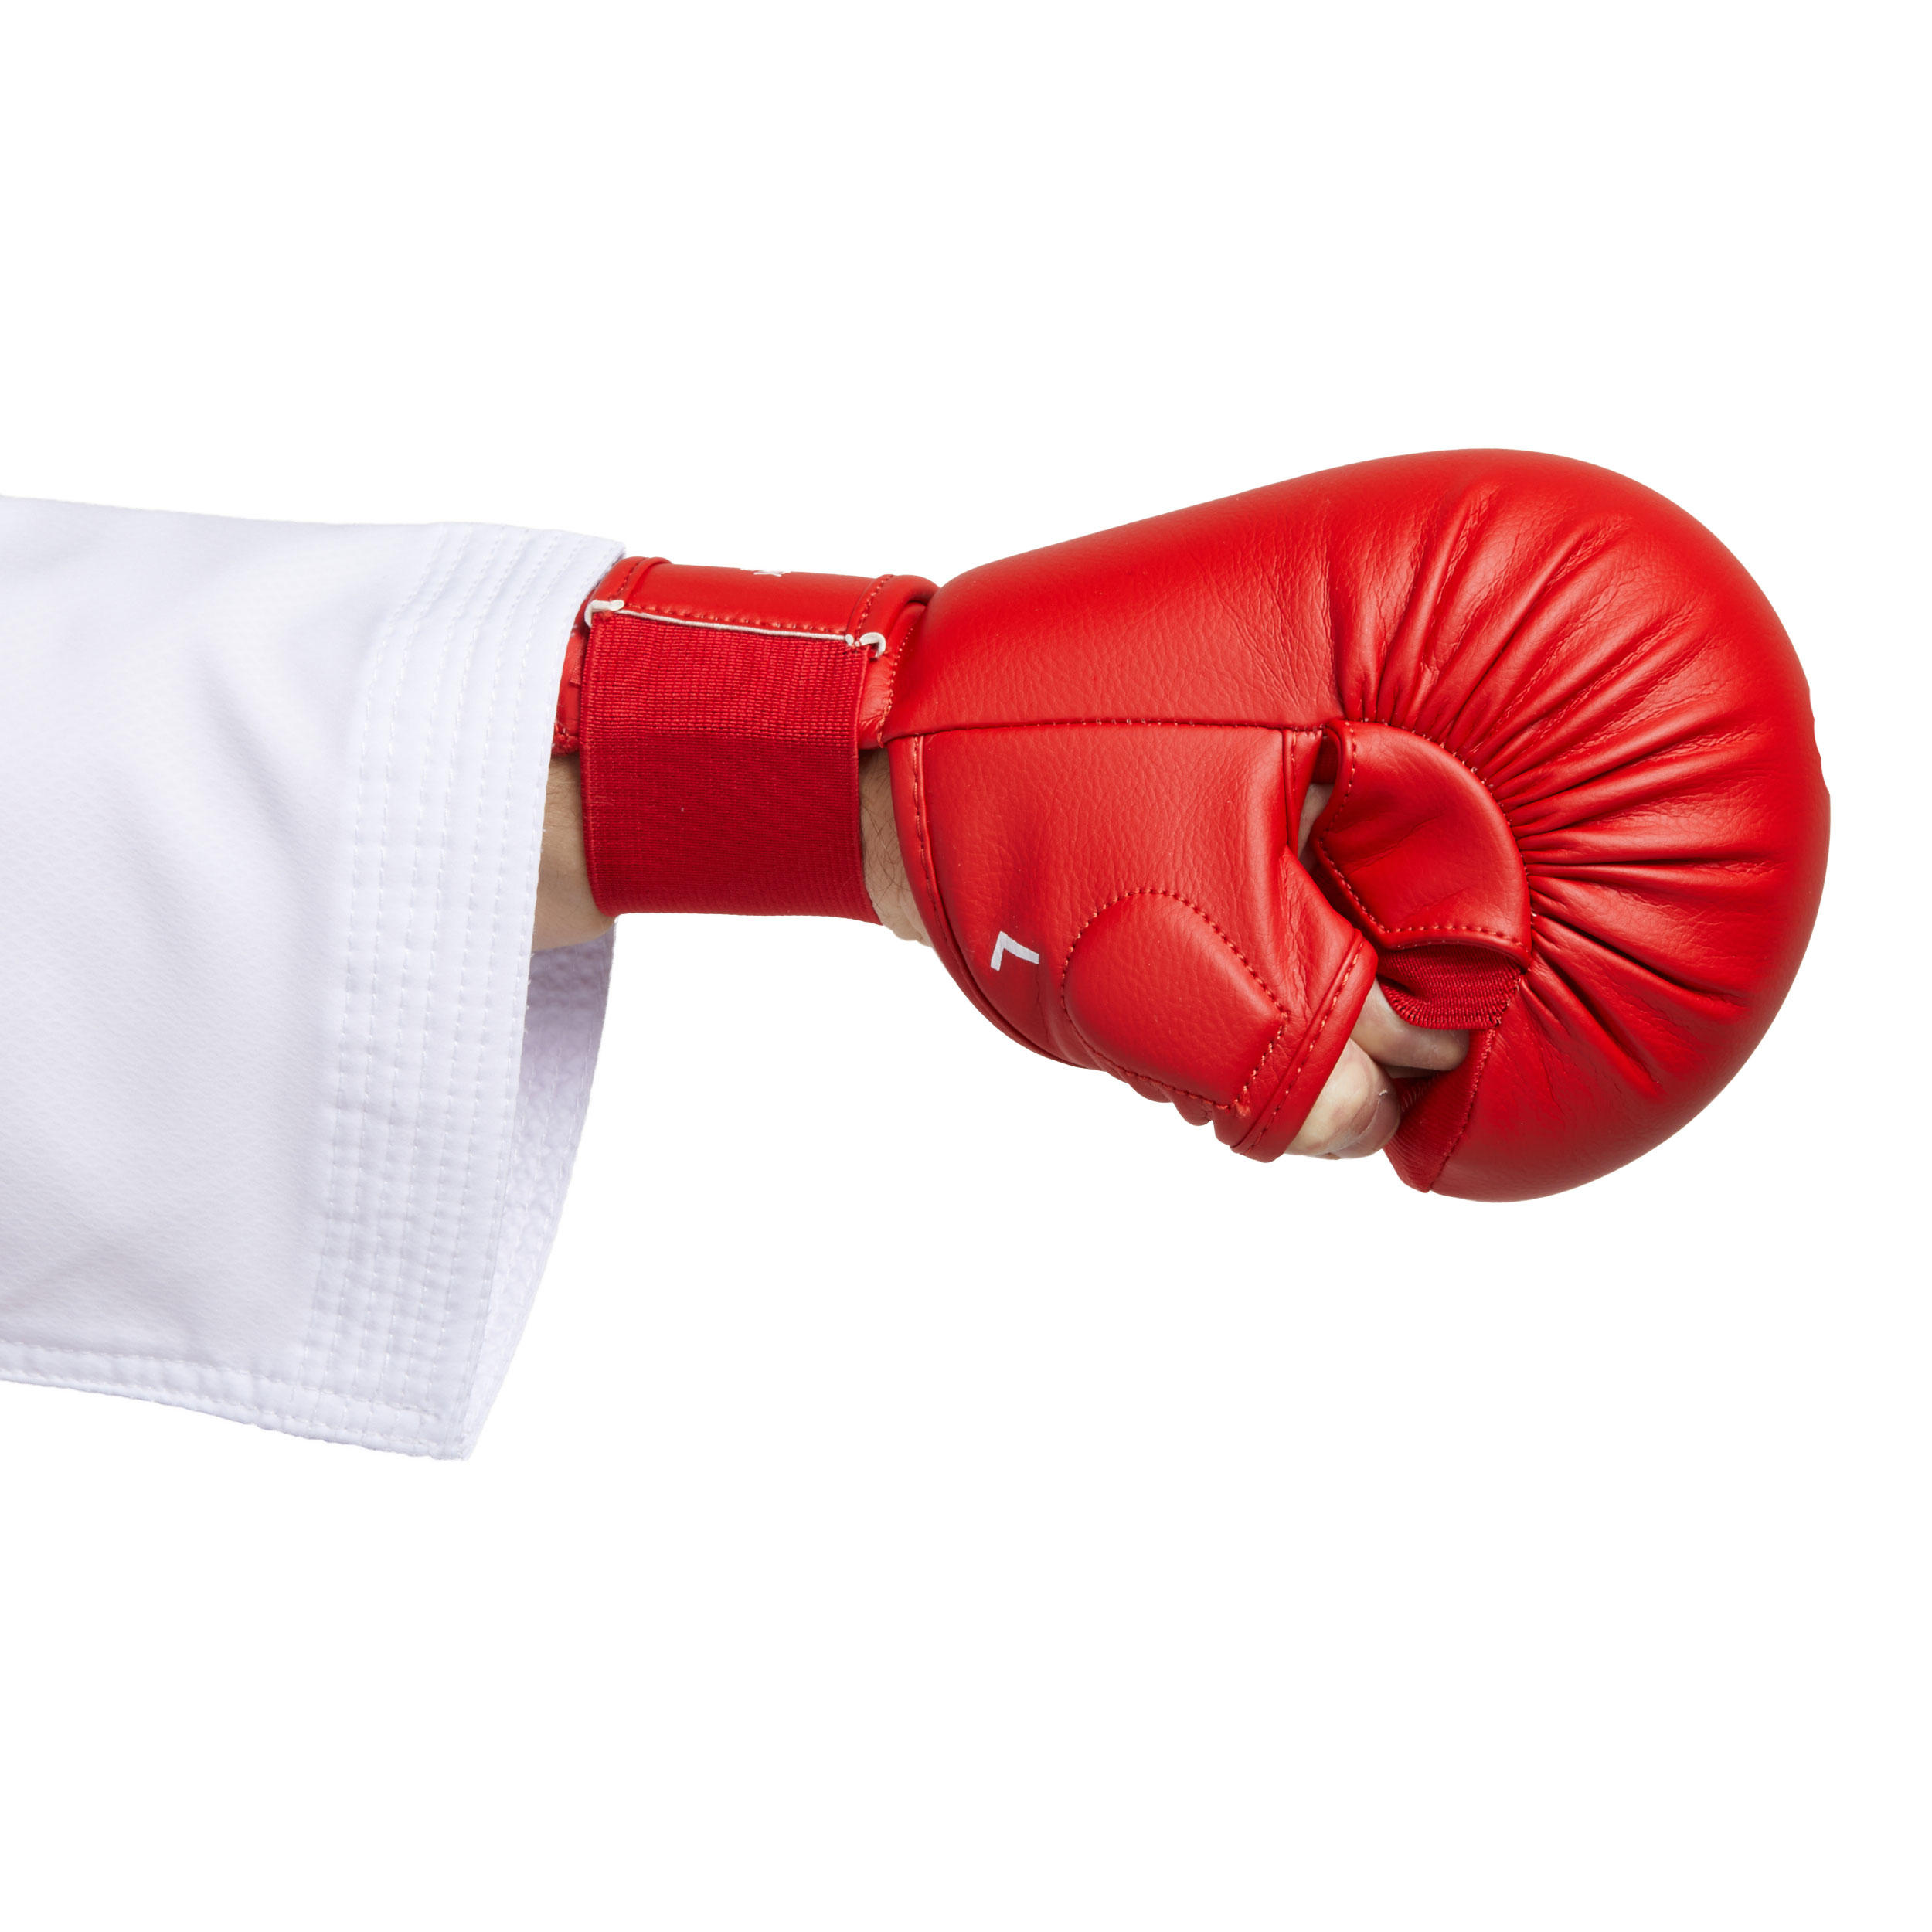 Karate Mitts 900 - Red 5/9